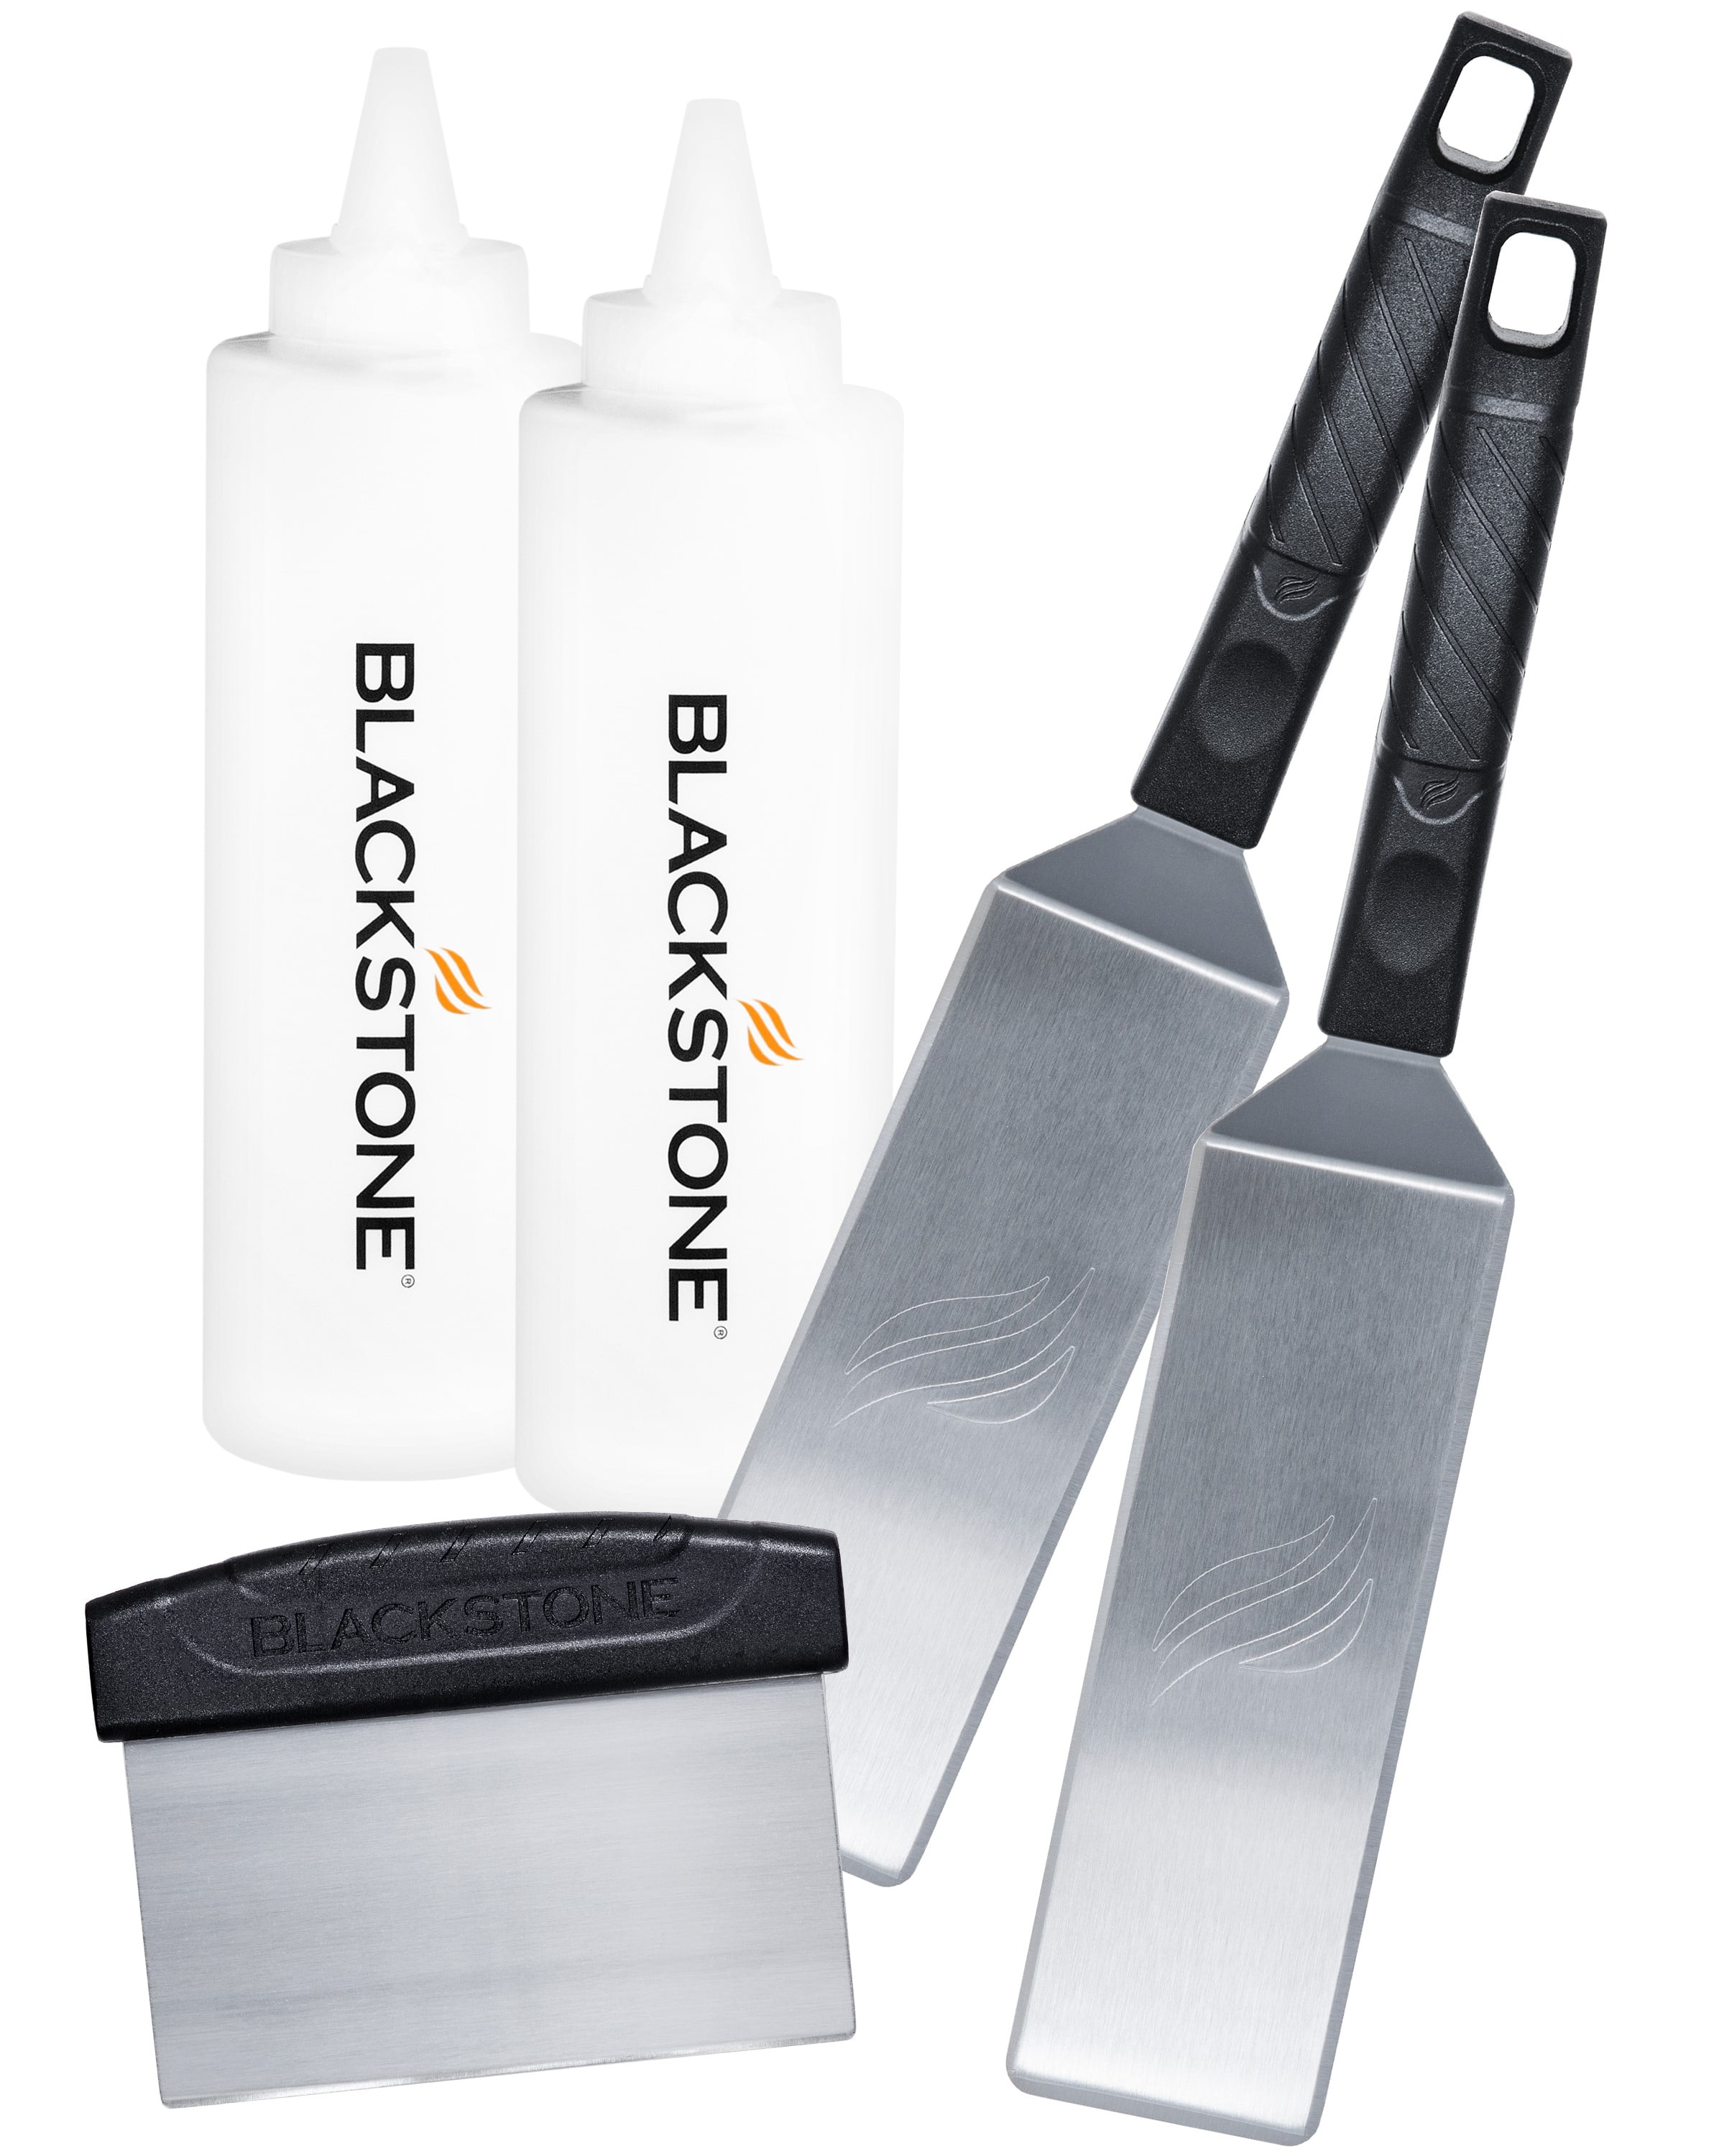 How Do Blackstone Griddles Work? – Blackstone Products